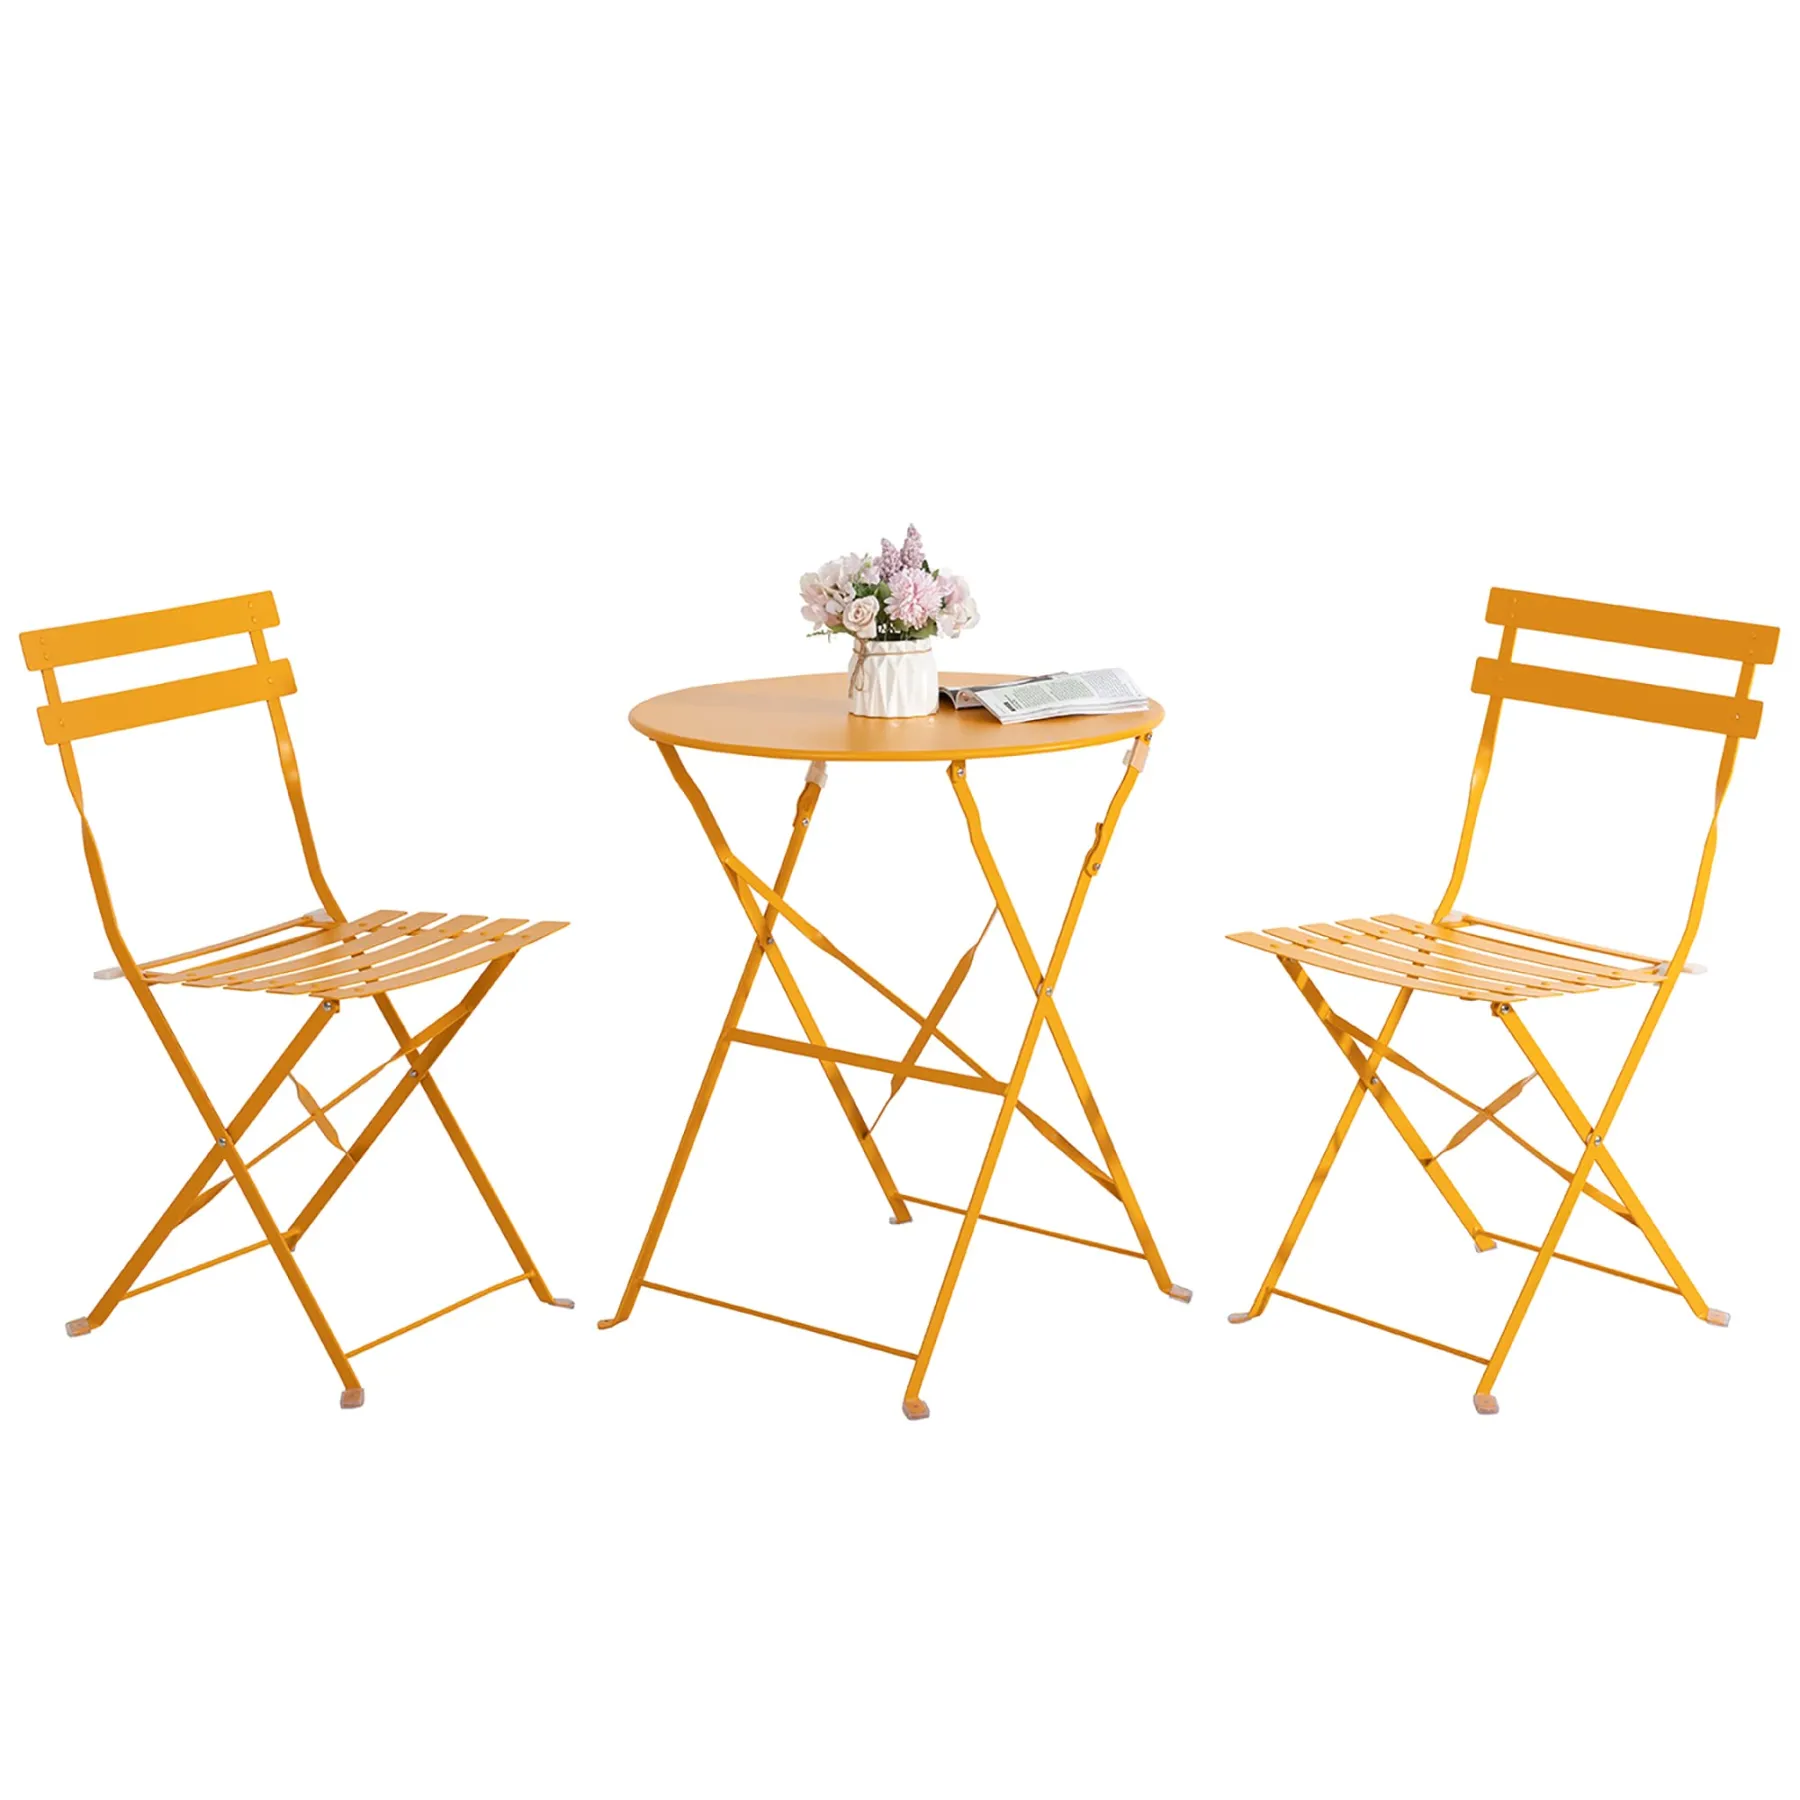 3-Piece Powder-Coated Iron Bistro Set of Foldable Garden Table and Chairs in Yellow